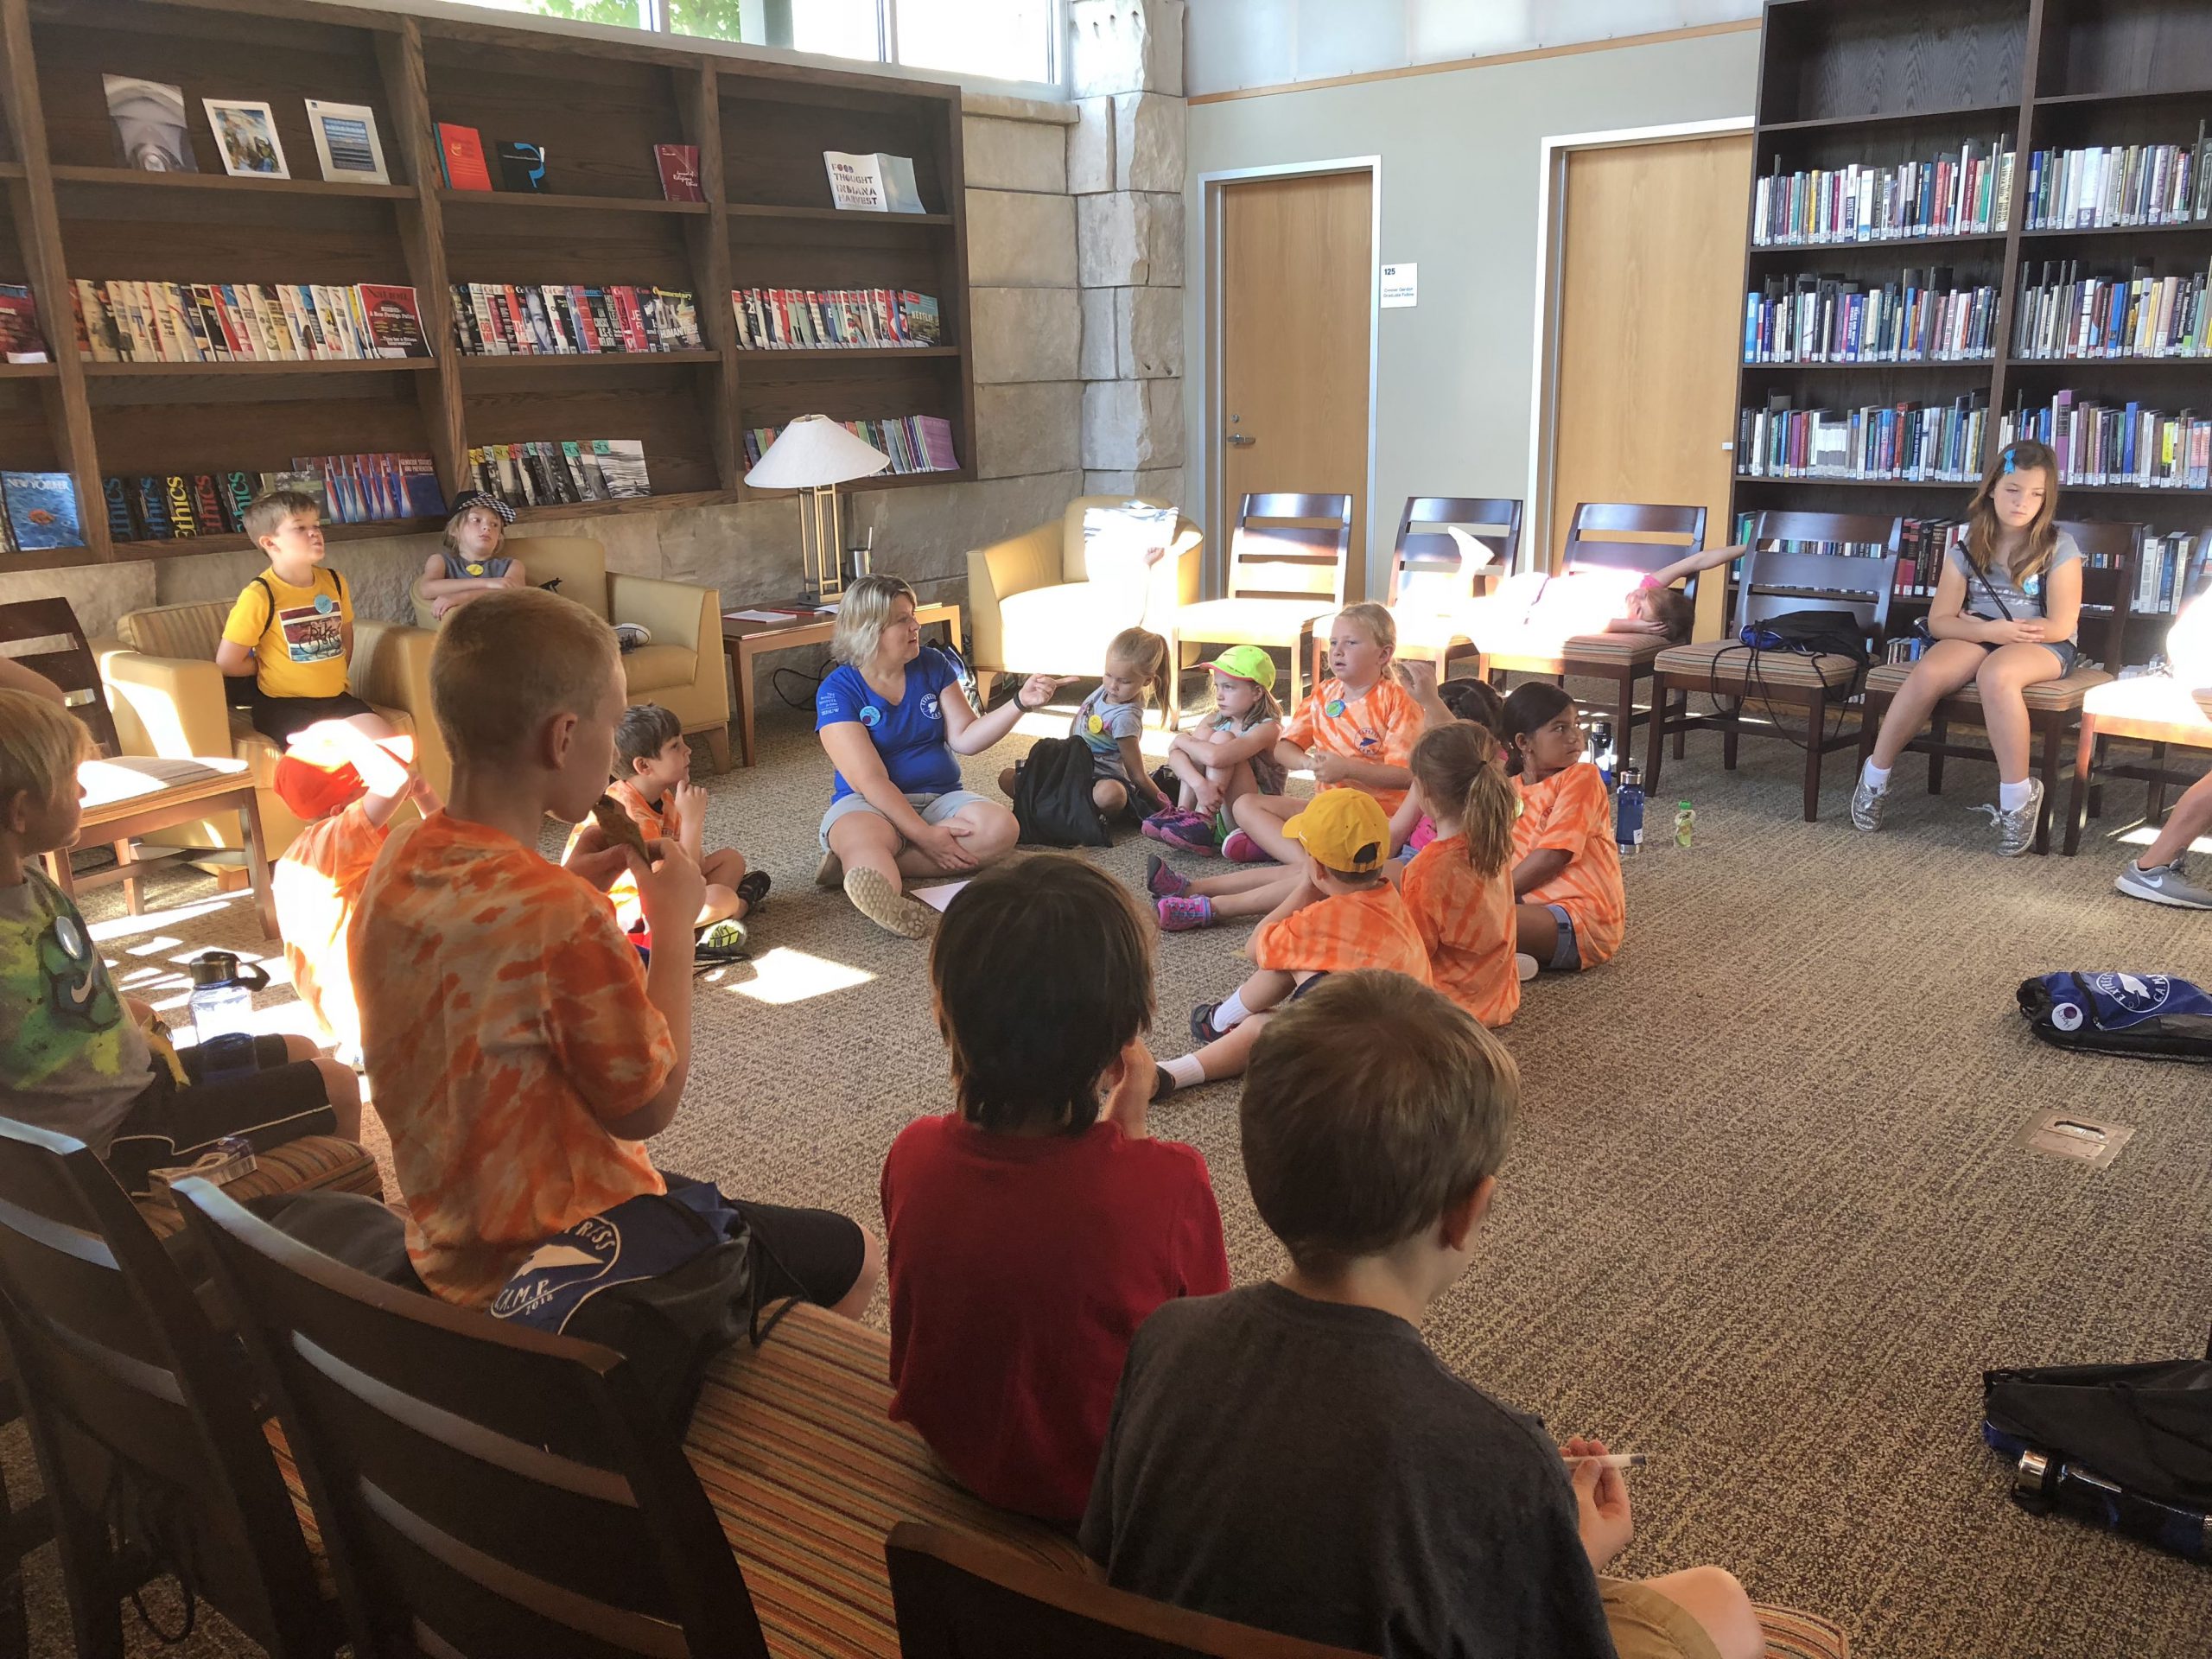 A large group of children, many of whom wear tie-dyed orange shirts gather in a semicircle in a library setting around a teacher